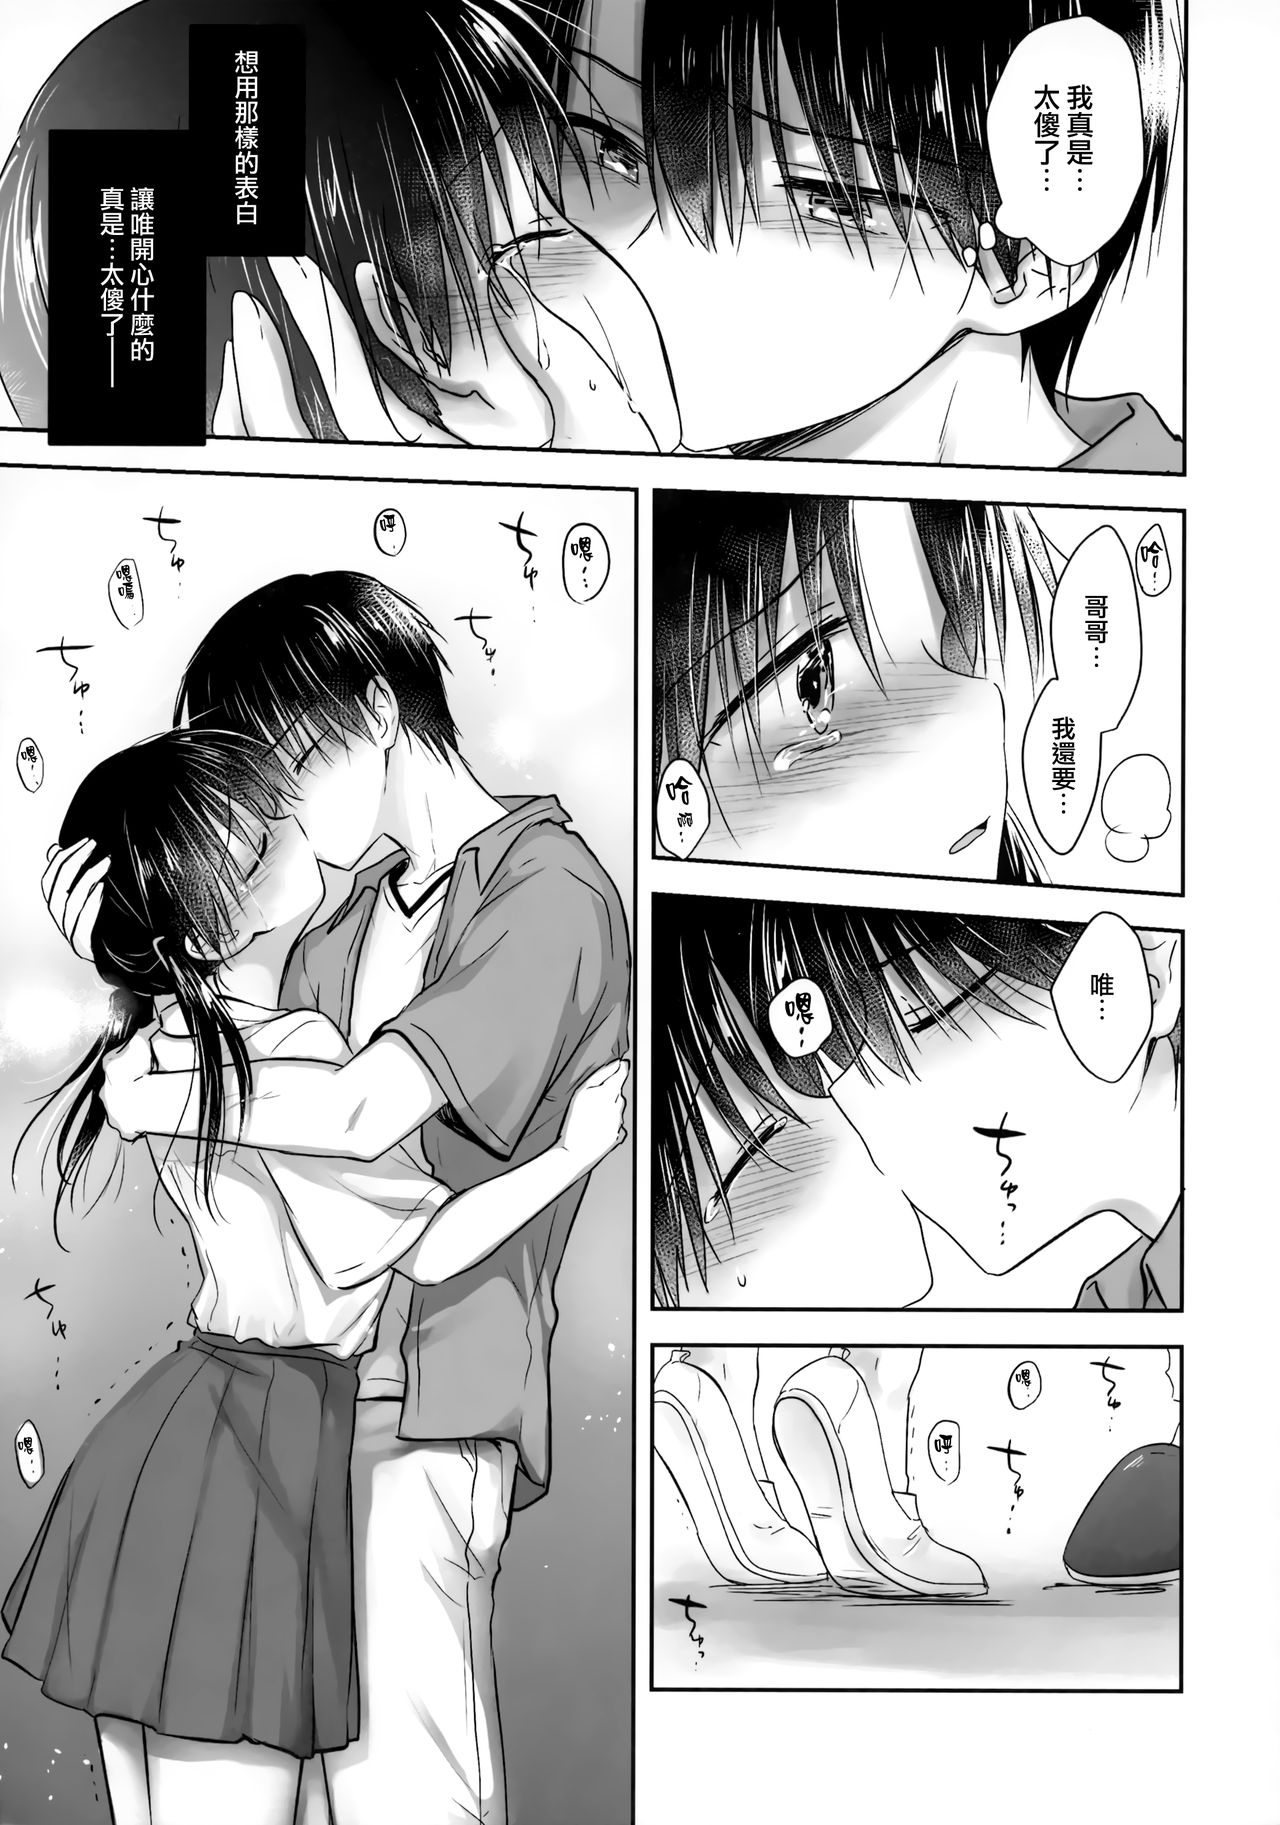 (C96) [Aquadrop (Mikami Mika)] Omoide Sex [Chinese] [山樱汉化] page 26 full